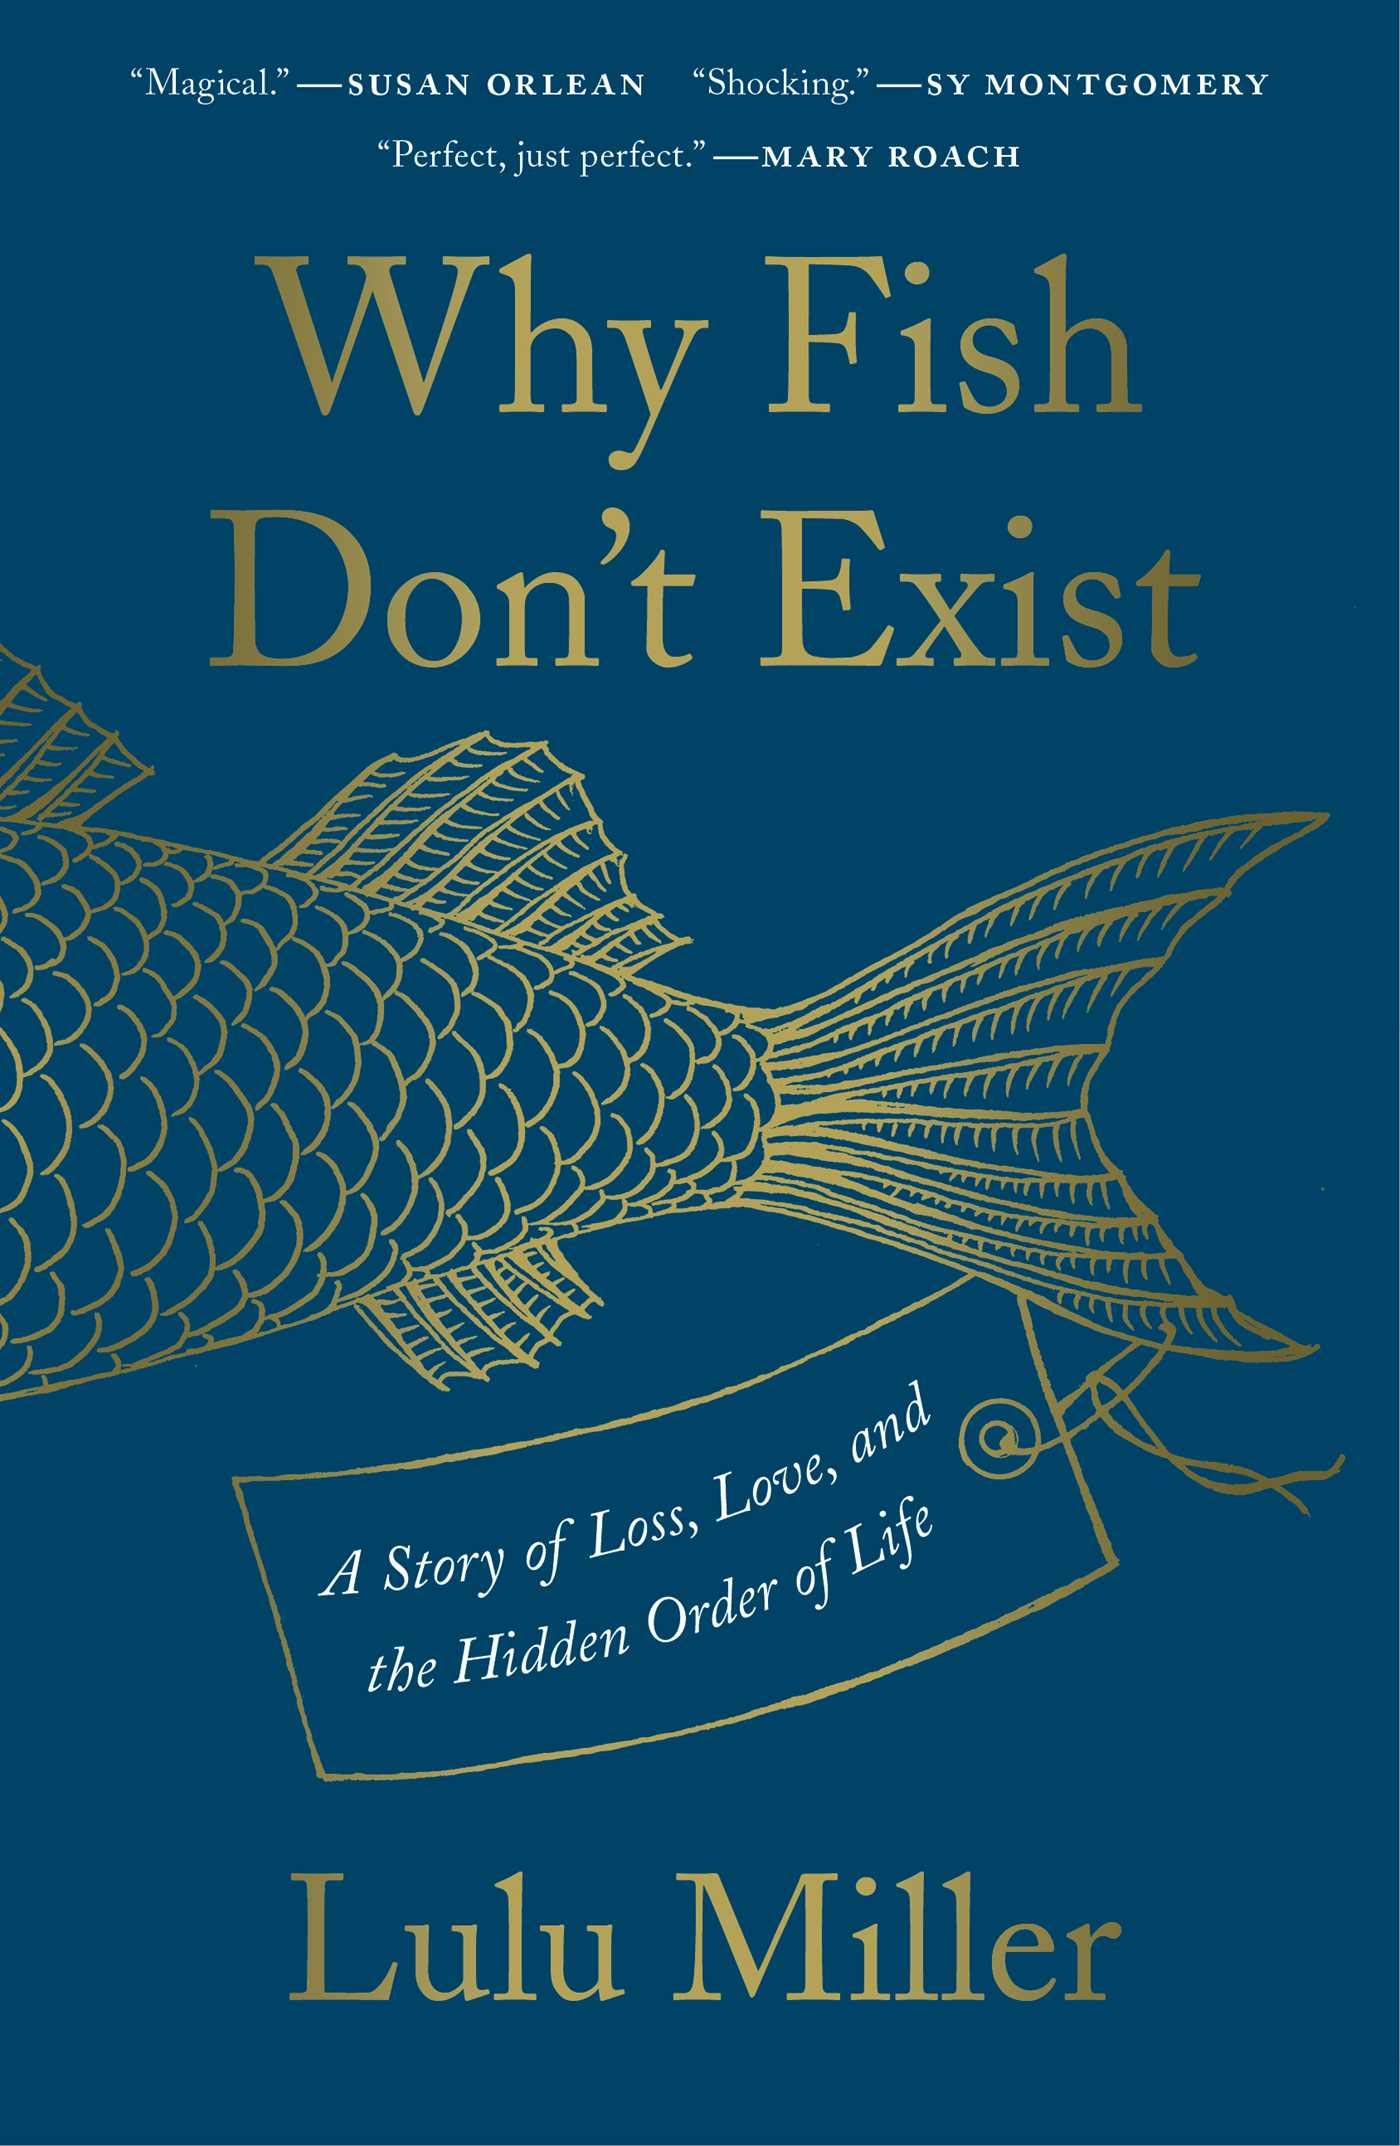 Lulu Miller: Why Fish Don't Exist: A Story of Loss, Love, and the Hidden Order of Life